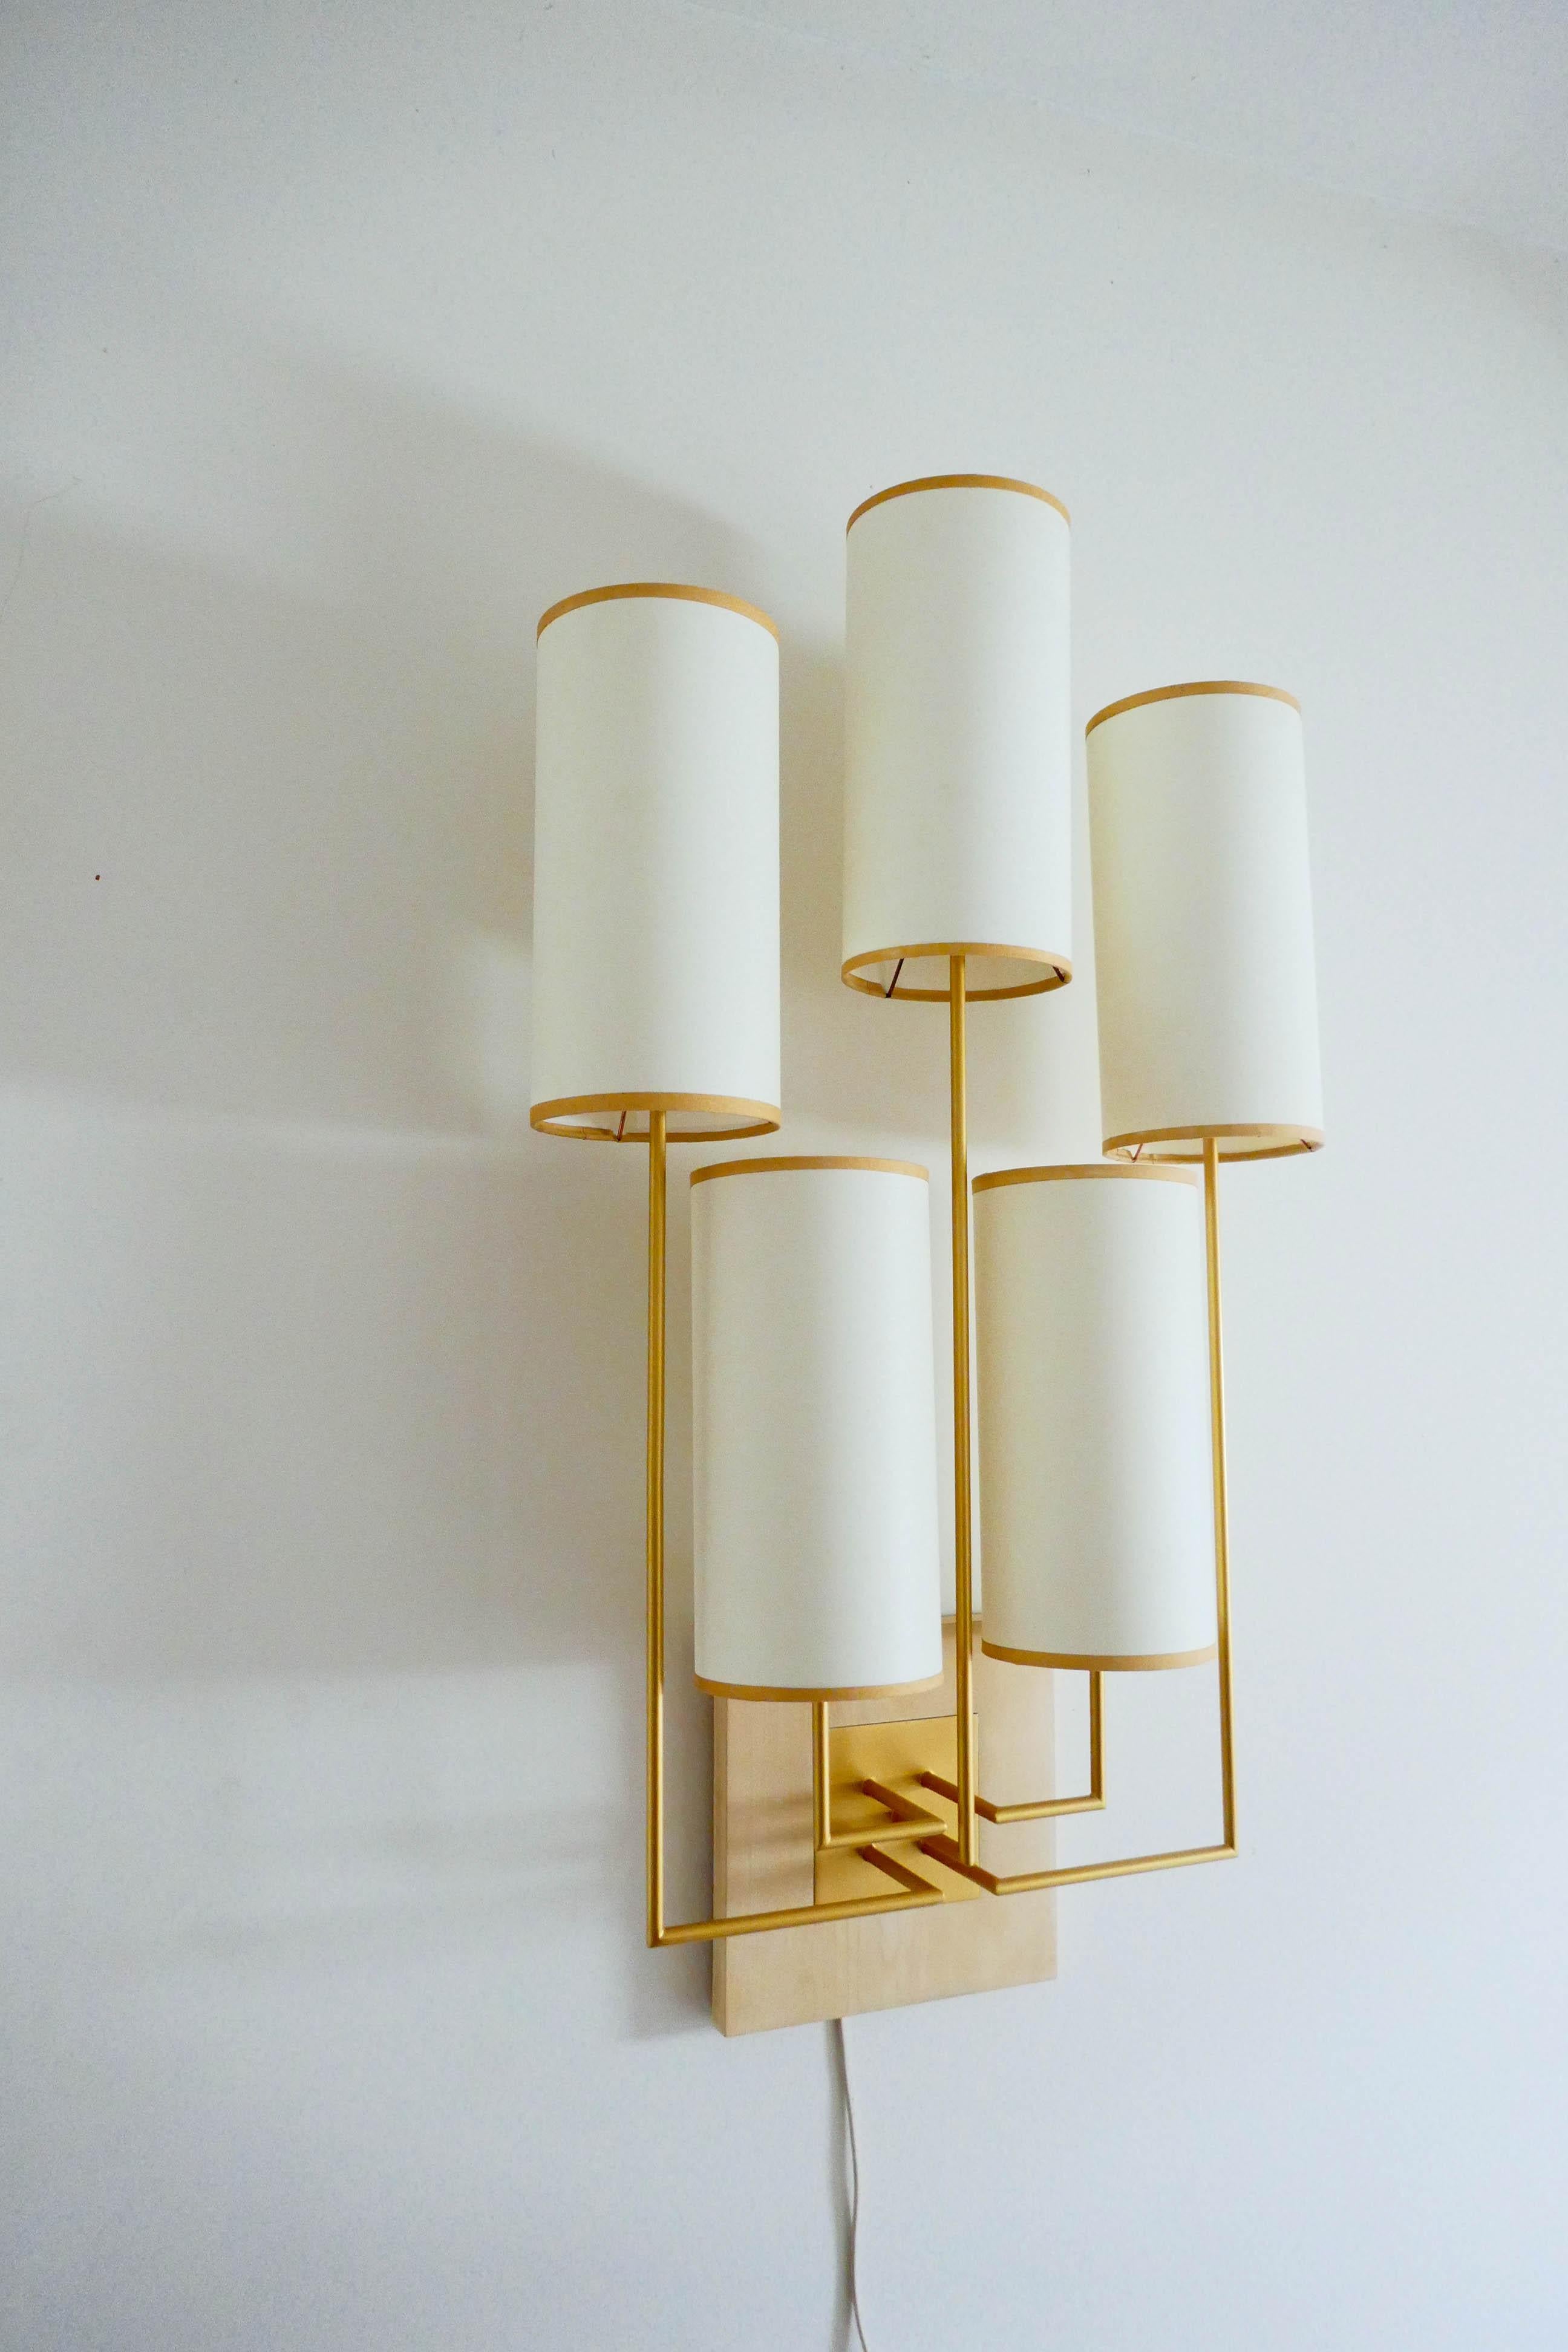 Pair of Wall Lamp Sconce in Gold Patina and White Fabric Lamp Shades For Sale 1